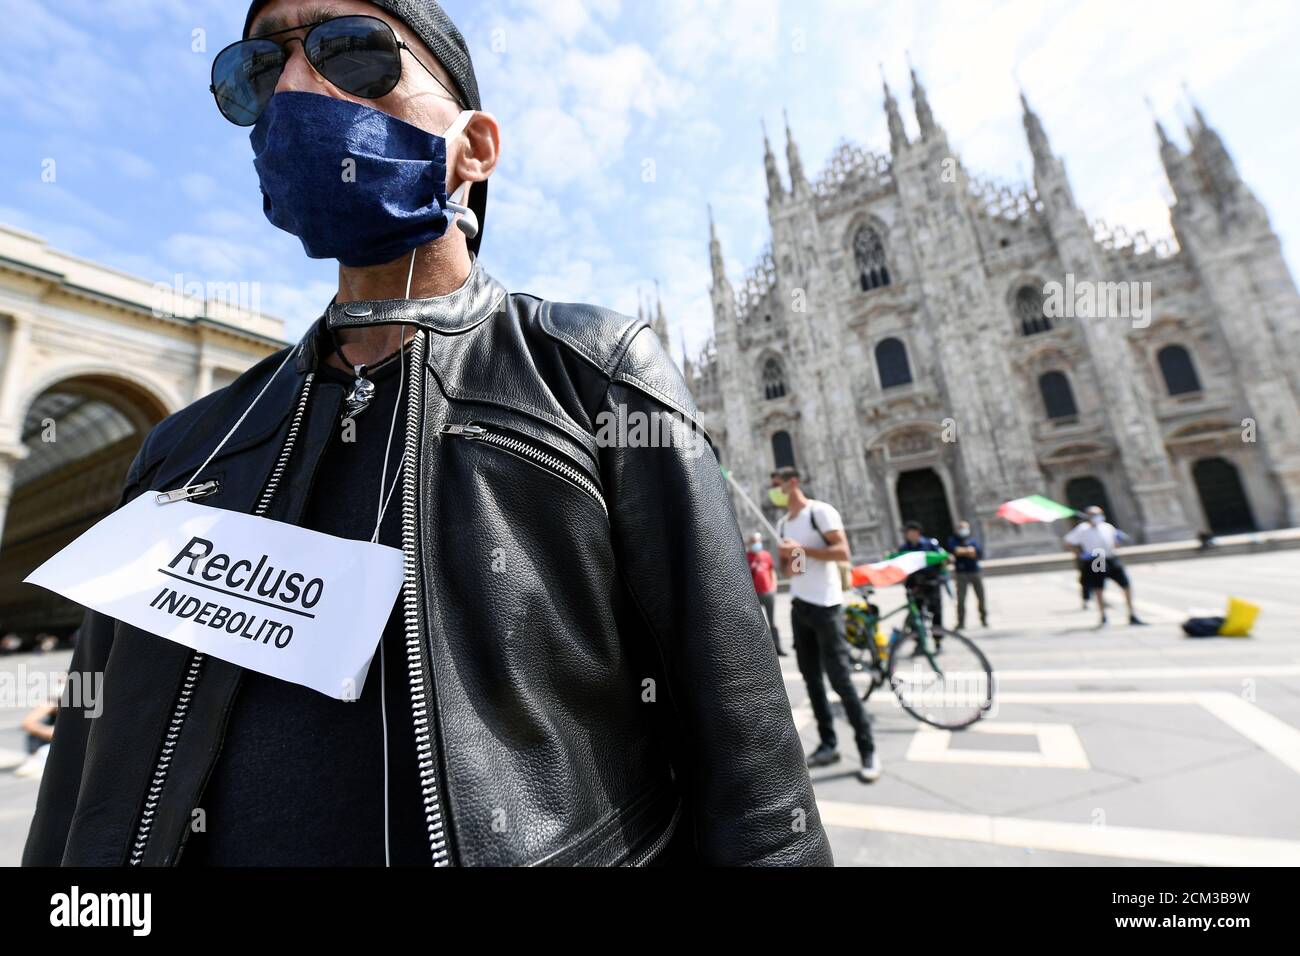 A protester wearing a protective mask and a sign attends a demonstration against the economic consequences of the lockdown at the Duomo square, as Italy begins a staged end to a nationwide lockdown due to a spread of the coronavirus disease (COVID-19), in Milan, Italy, May 4, 2020. Sign reads: 'Locked up. Weakened '. REUTERS/Flavio Lo Scalzo Stock Photo